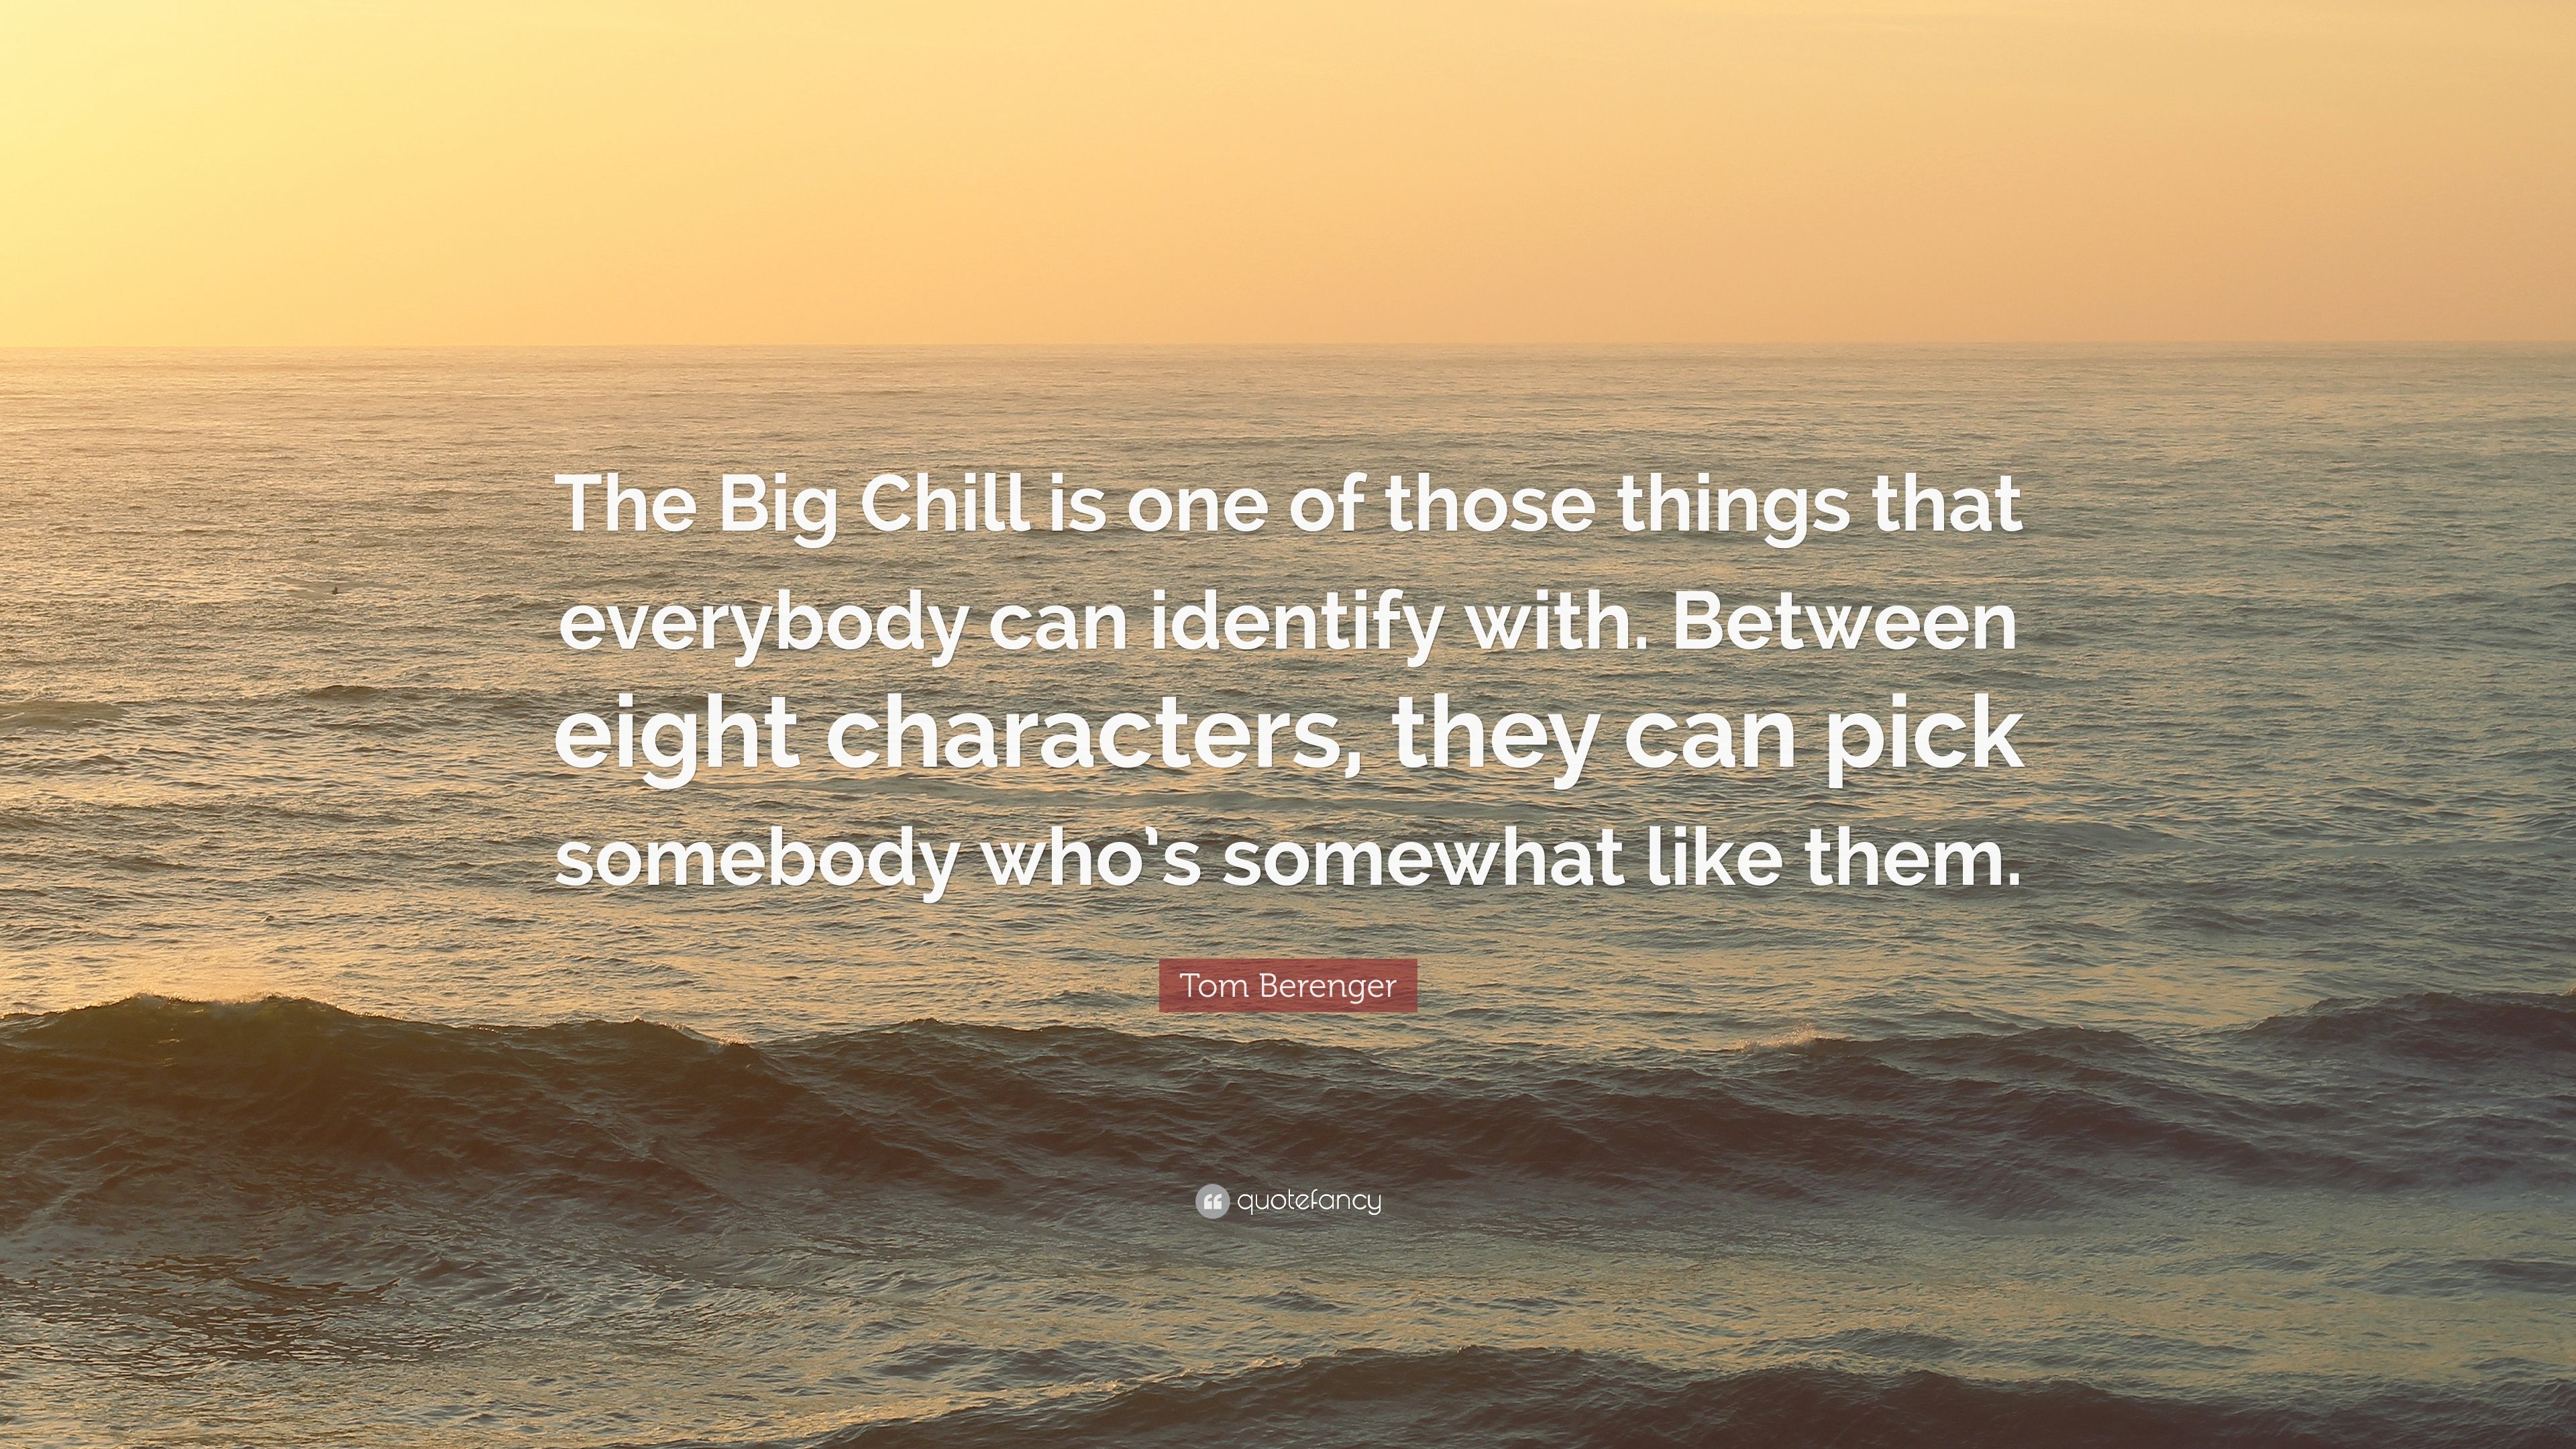 Tom Berenger Quote: “The Big Chill is one of those things that everybody can identify with. Between eight characters, they can pick somebody .” (7 wallpaper)